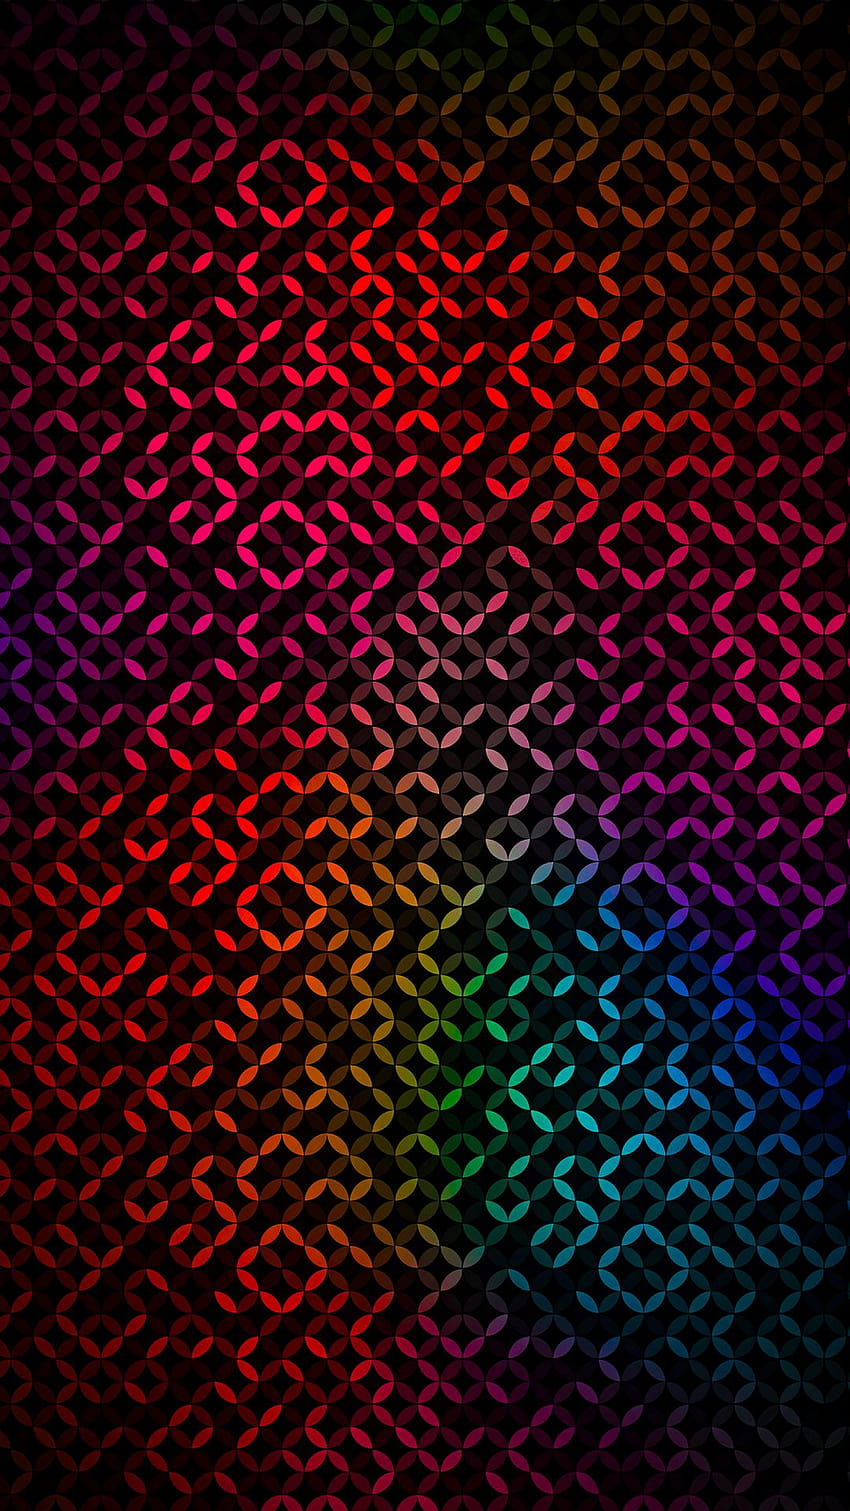 1080x1920 Thread Joints Abstract Iphone 7,6s,6 Plus, Pixel xl ,One Plus 3,3t,5 , Backgrounds, and HD phone wallpaper